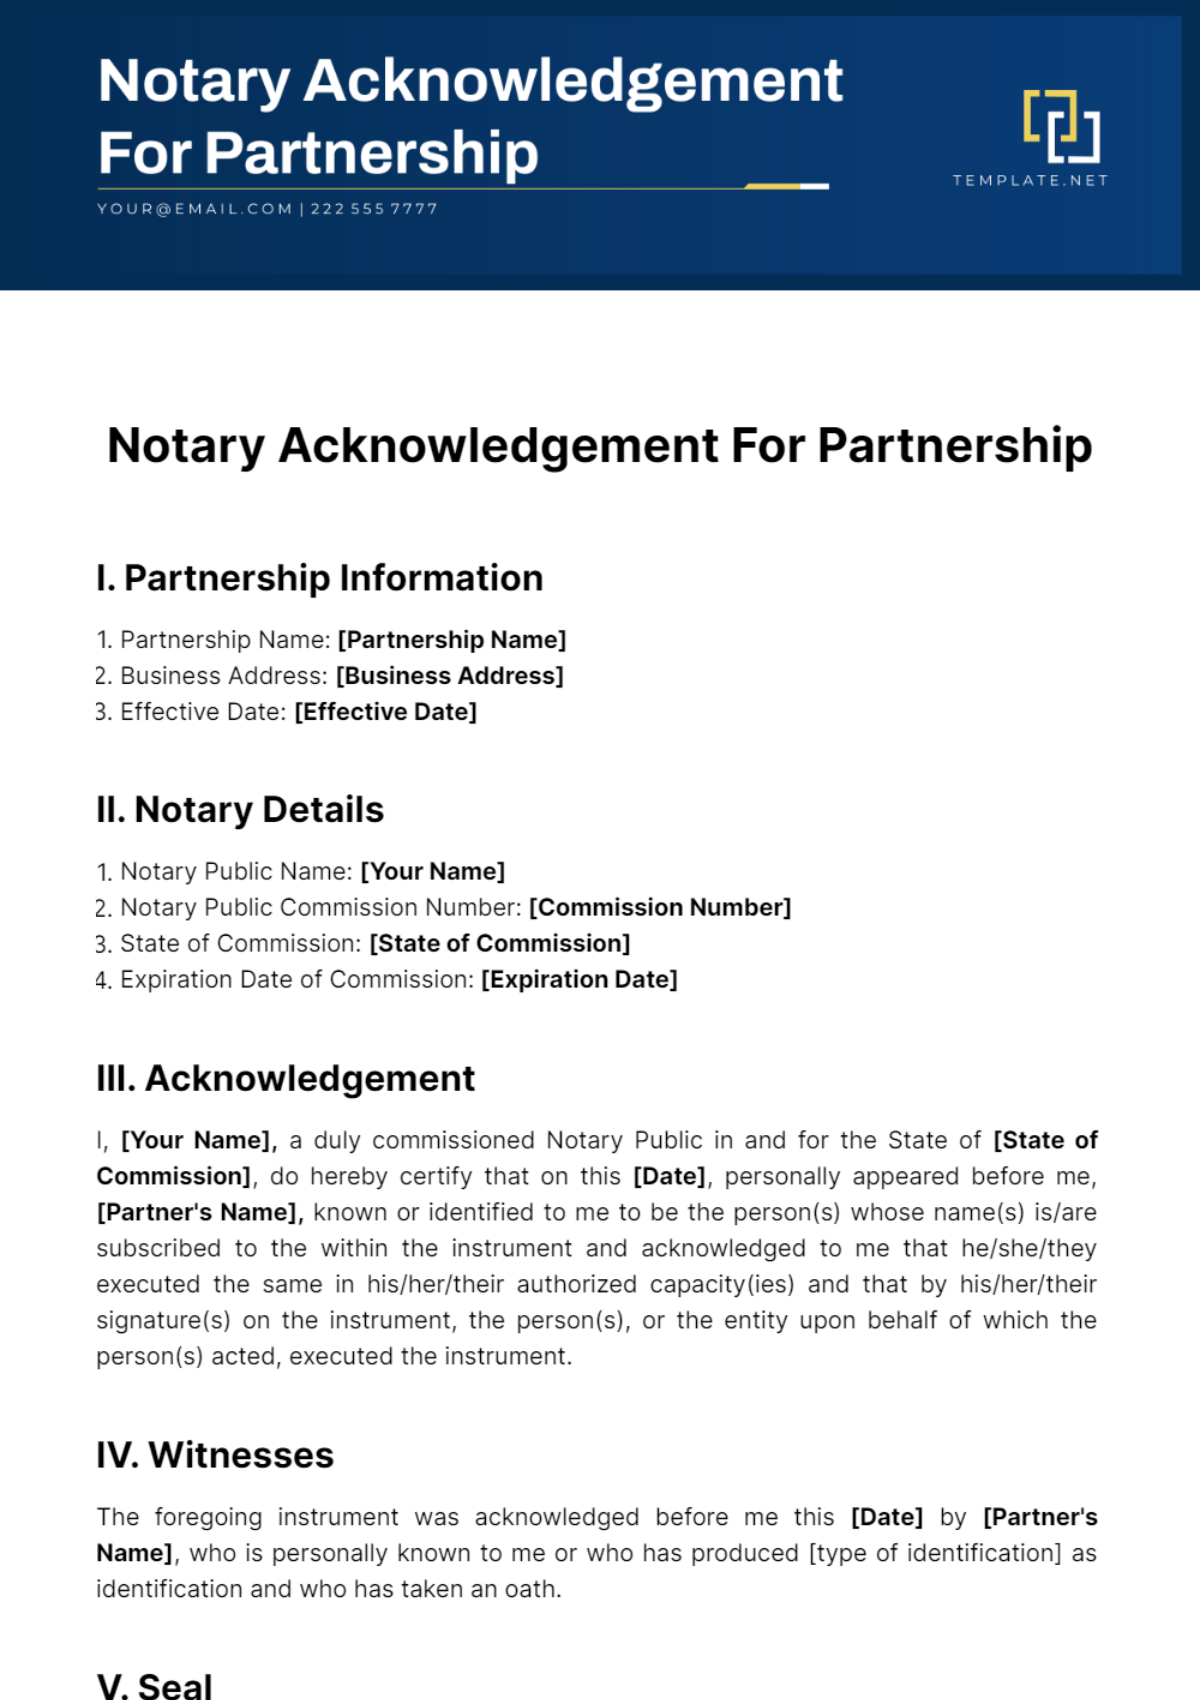 Notary Acknowledgement For Partnership Template